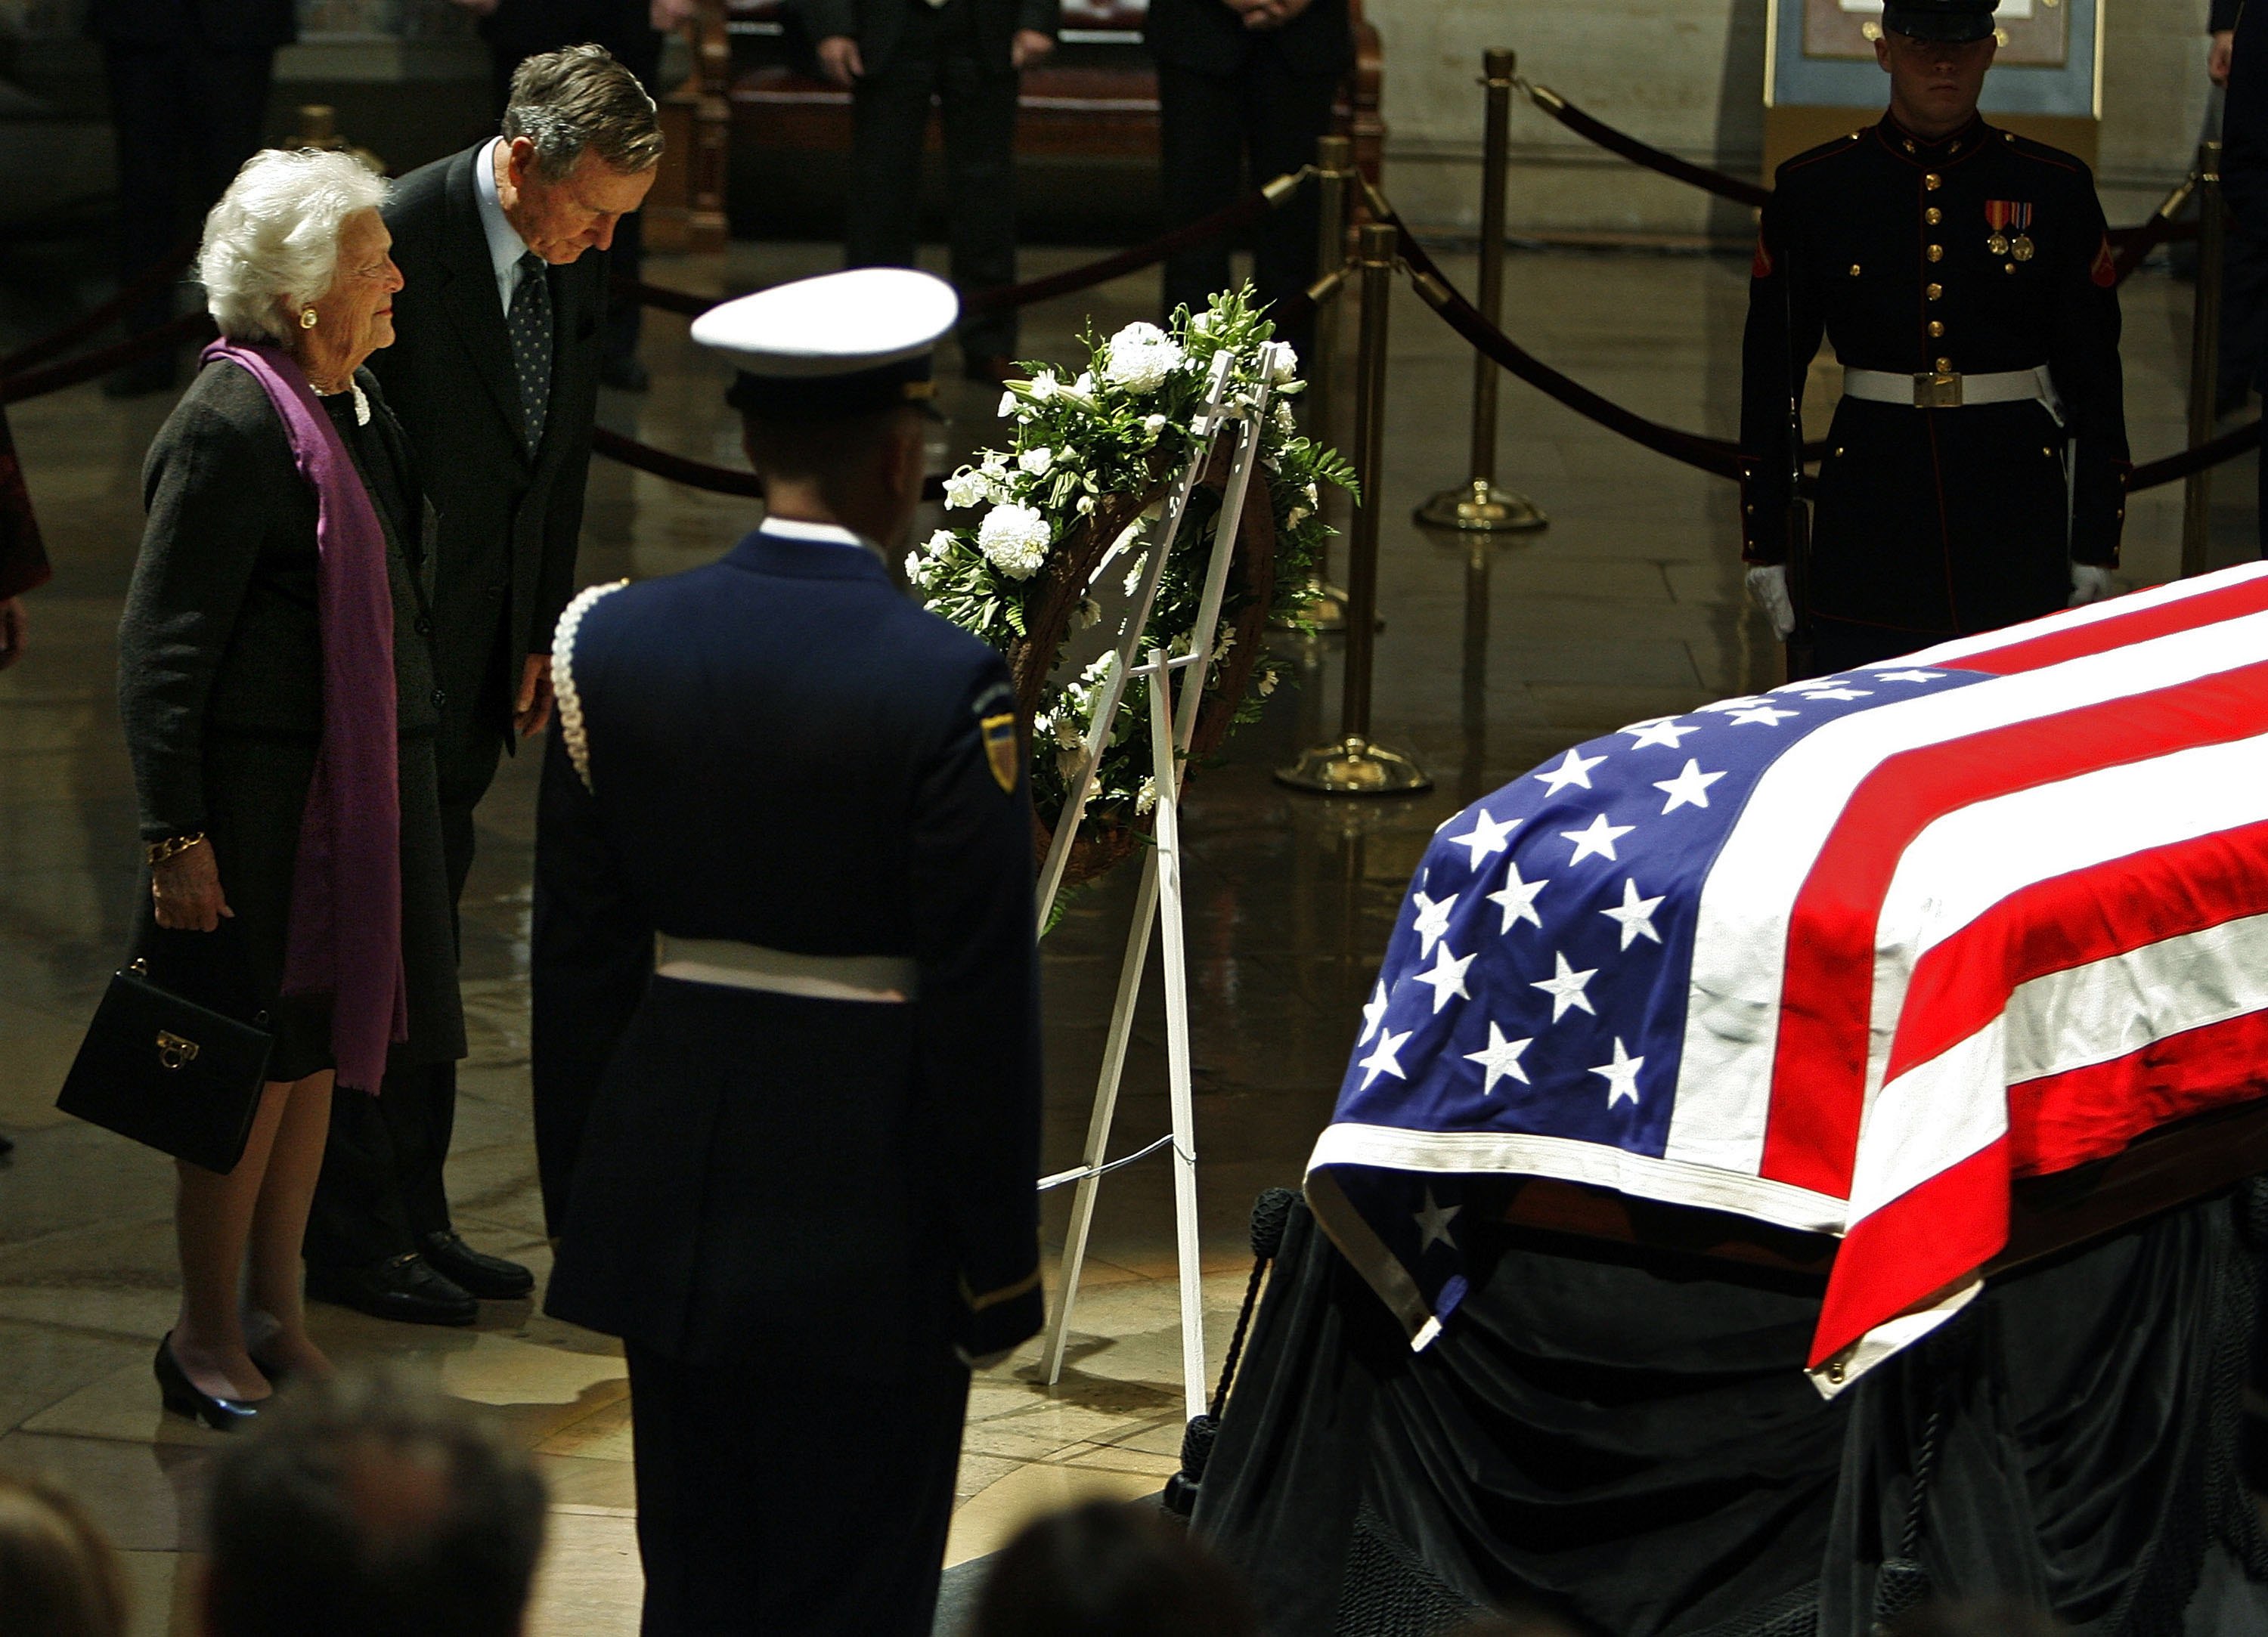 Former first lady Barbara Bush and former President George H.W. Bush pay their respects to Gerald R. Ford as his remains lie in state in the Rotunda of the US Capitol Jan. 1, 2007 